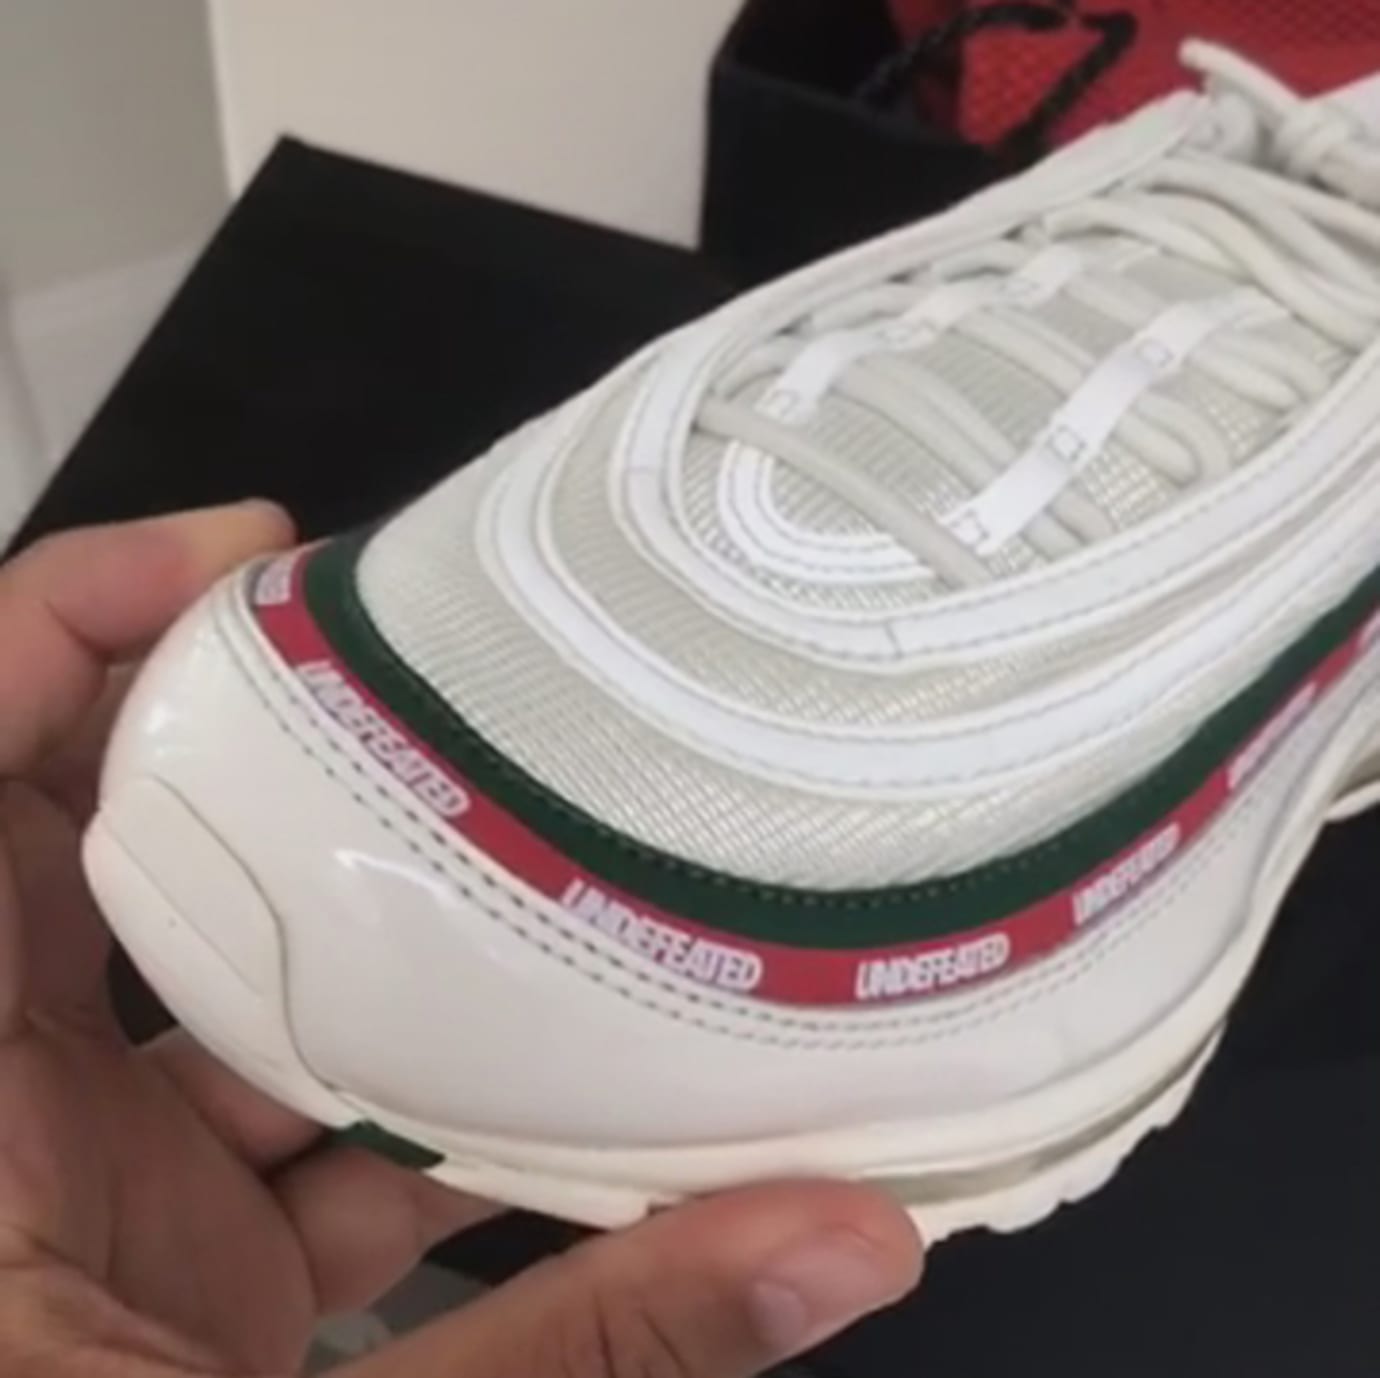 Undefeated Nike Air Max 97 Sail White Gorge Green Speed Red AJ1986 